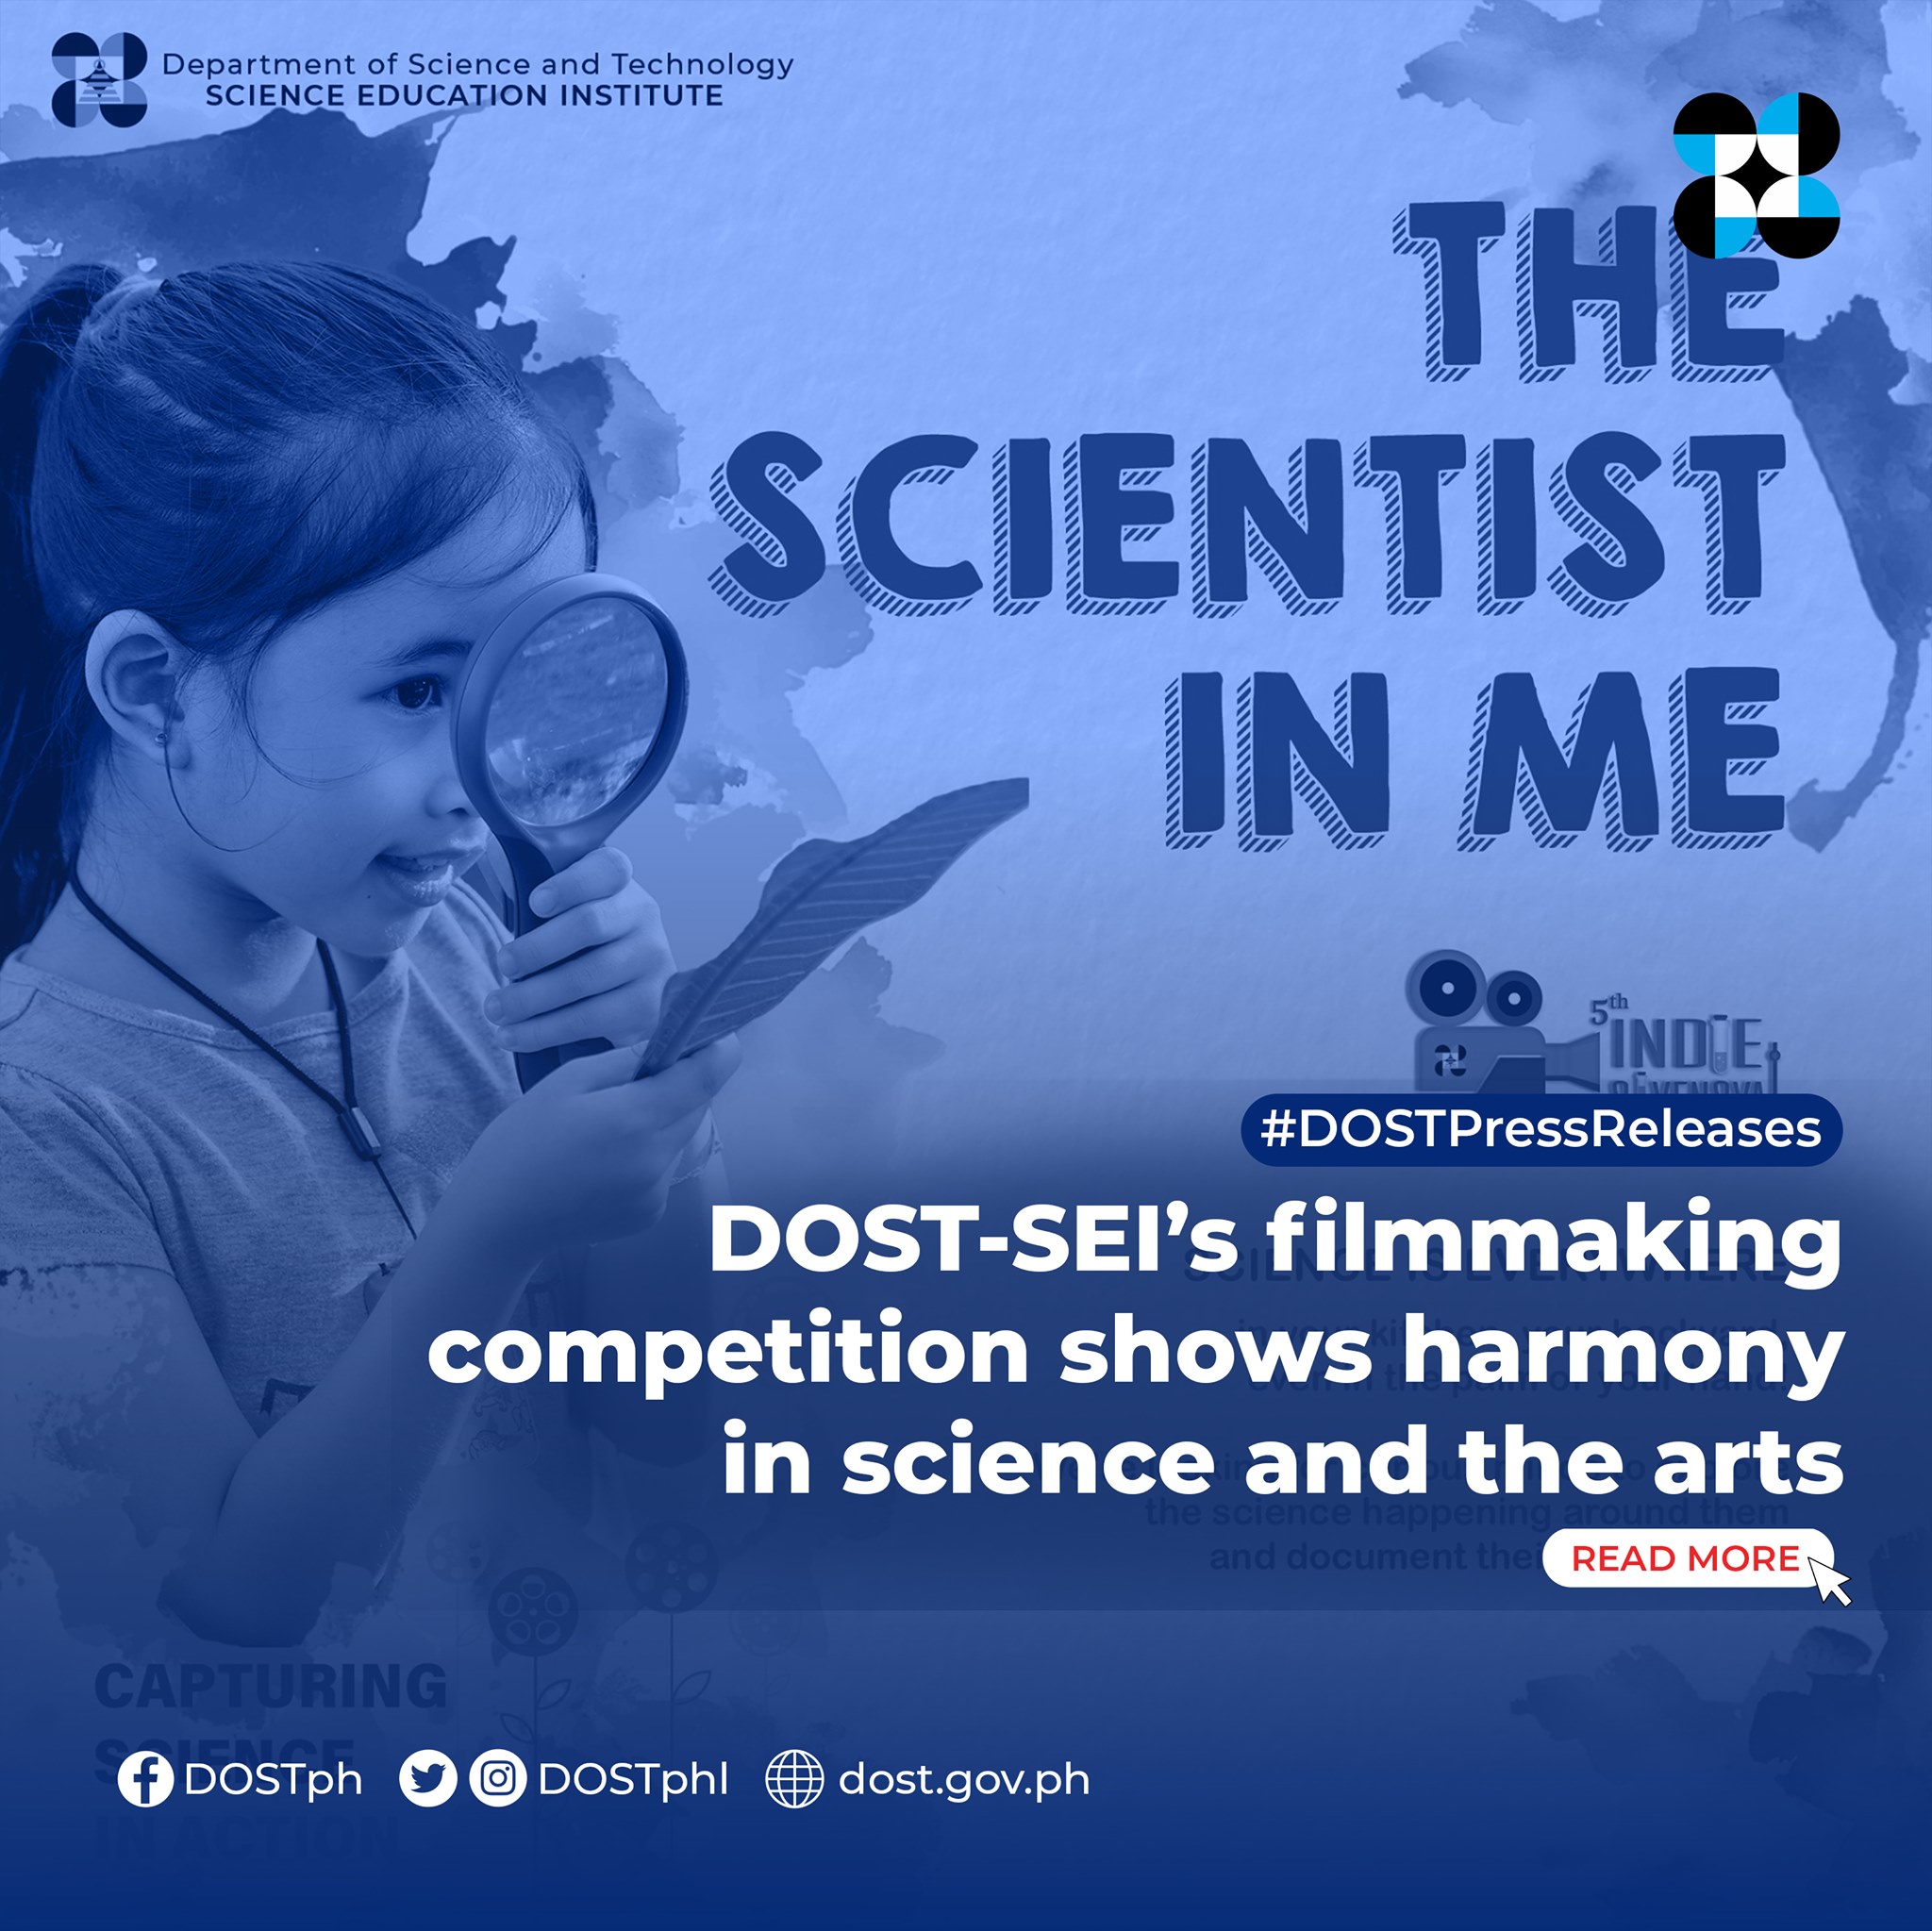 DOST-SEI’s filmmaking competition shows harmony in science and the arts image